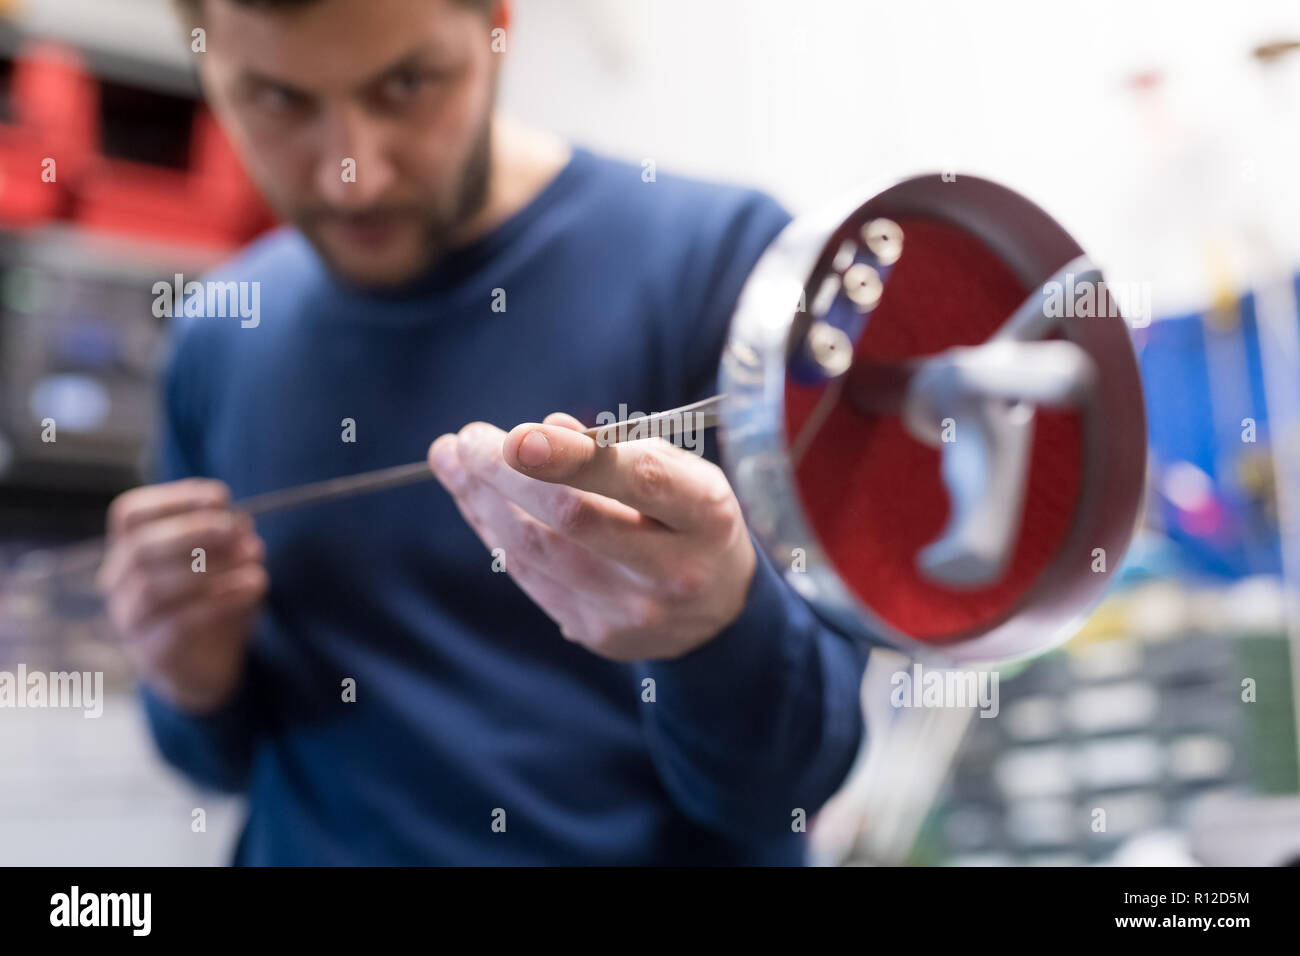 Fencing prop maker at work Stock Photo